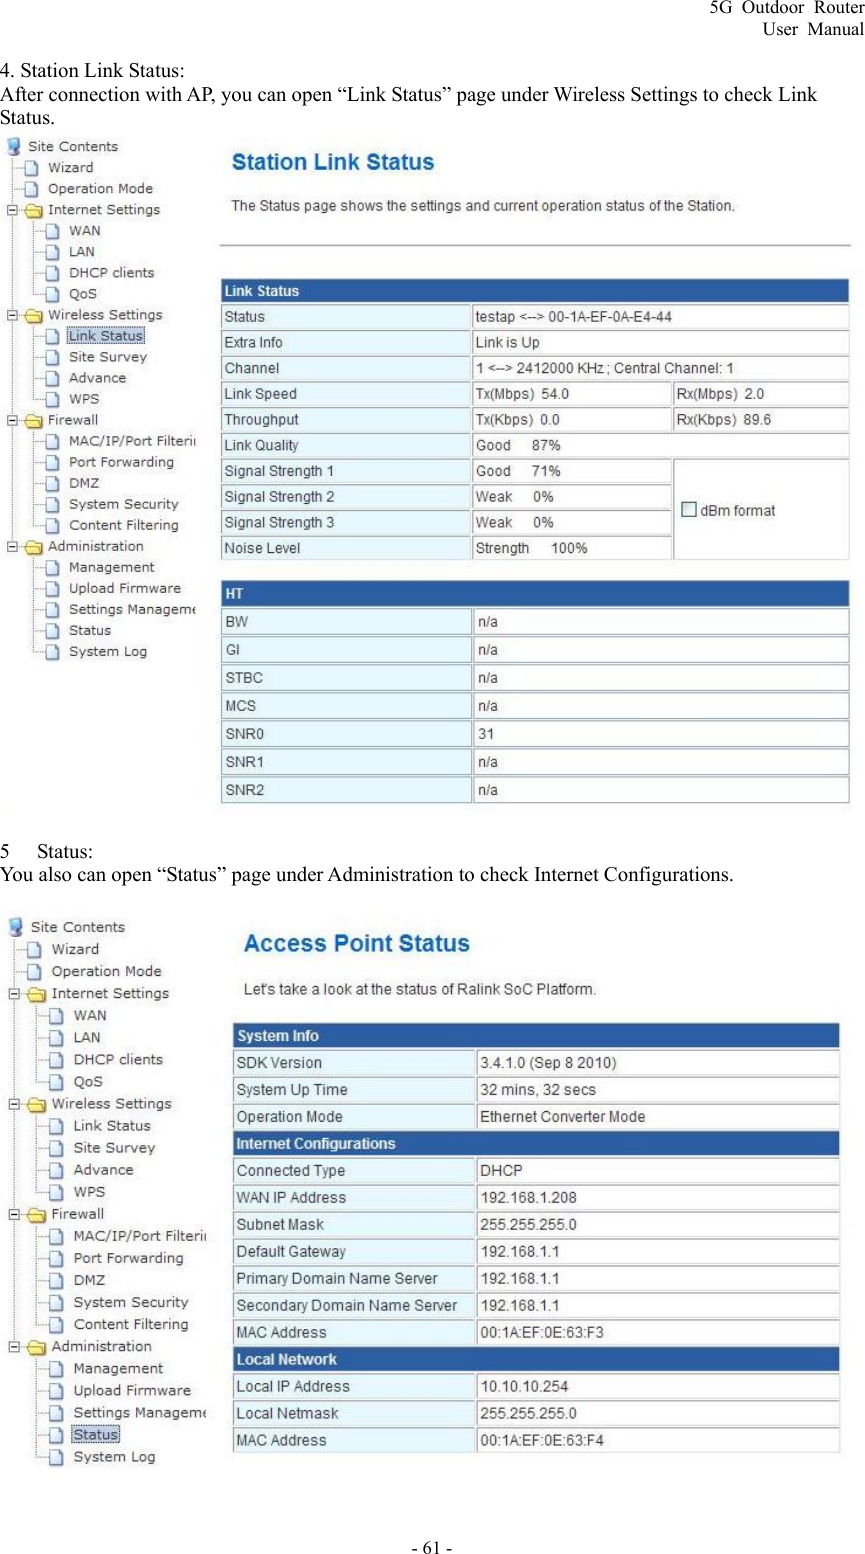 5G Outdoor Router User Manual - 61 - 4. Station Link Status:   After connection with AP, you can open “Link Status” page under Wireless Settings to check Link Status.   5 Status:  You also can open “Status” page under Administration to check Internet Configurations.    